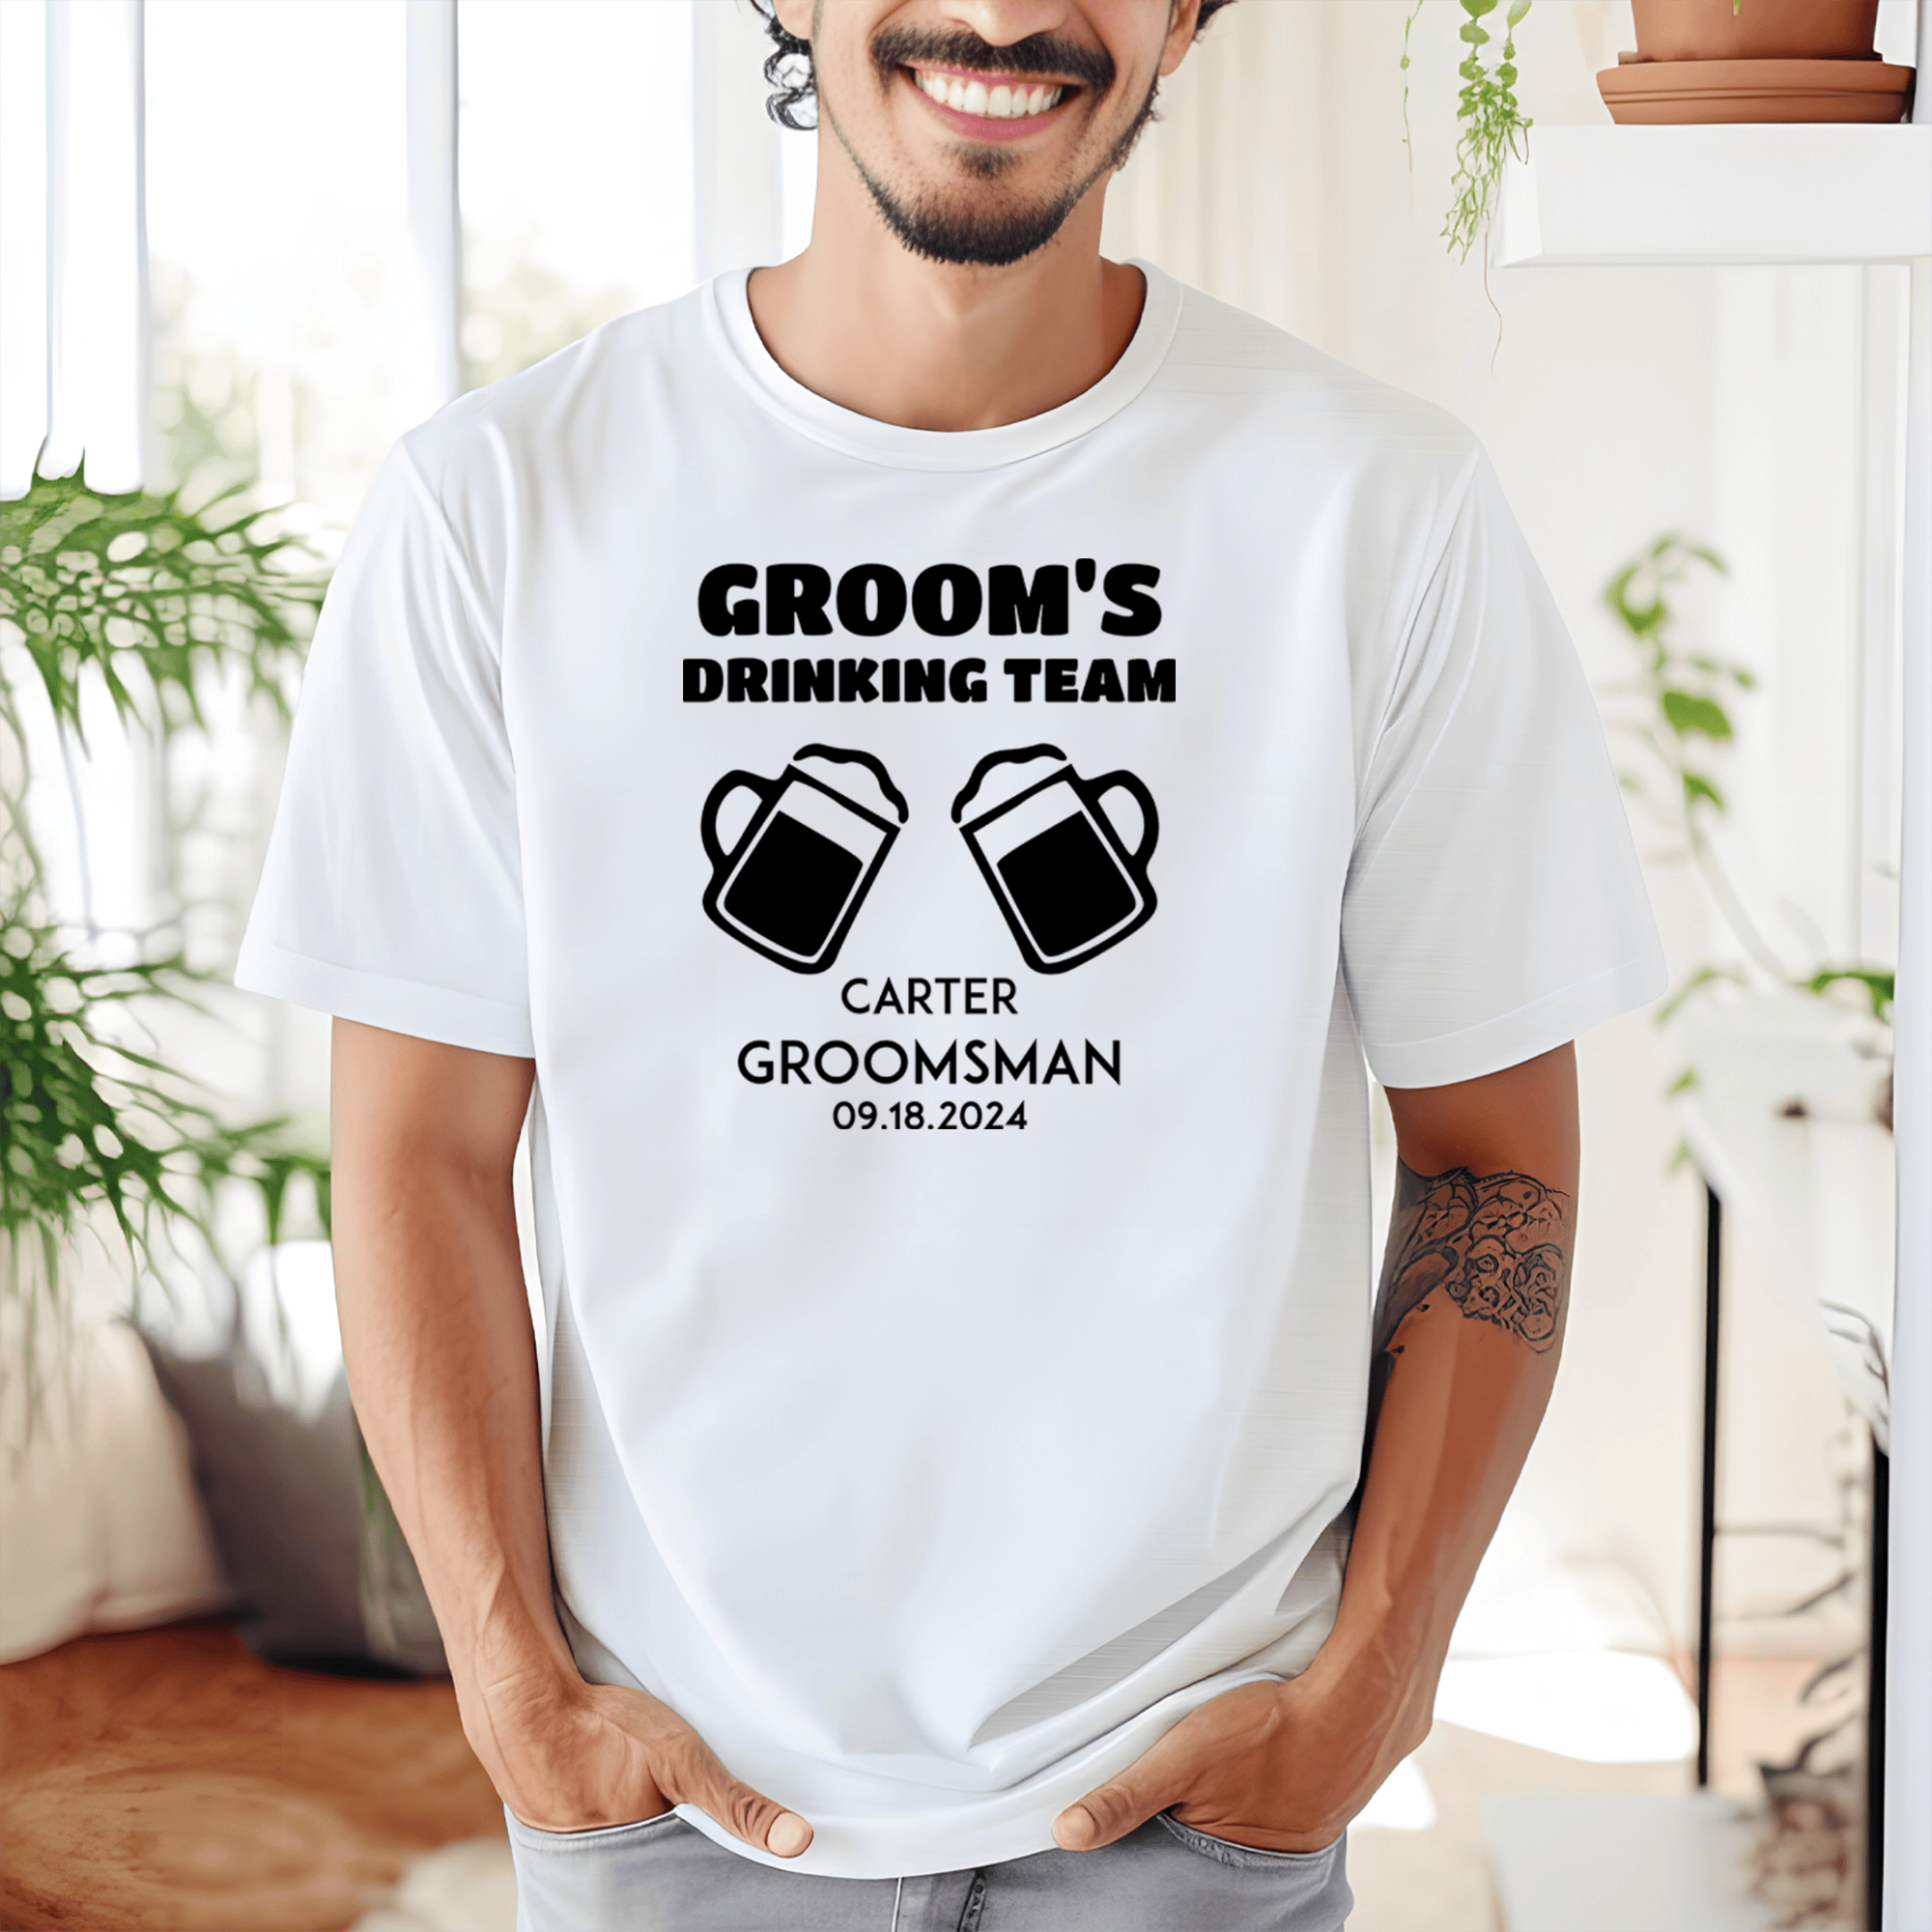 Grey Mens T-Shirt With Beer Drinking Team Design